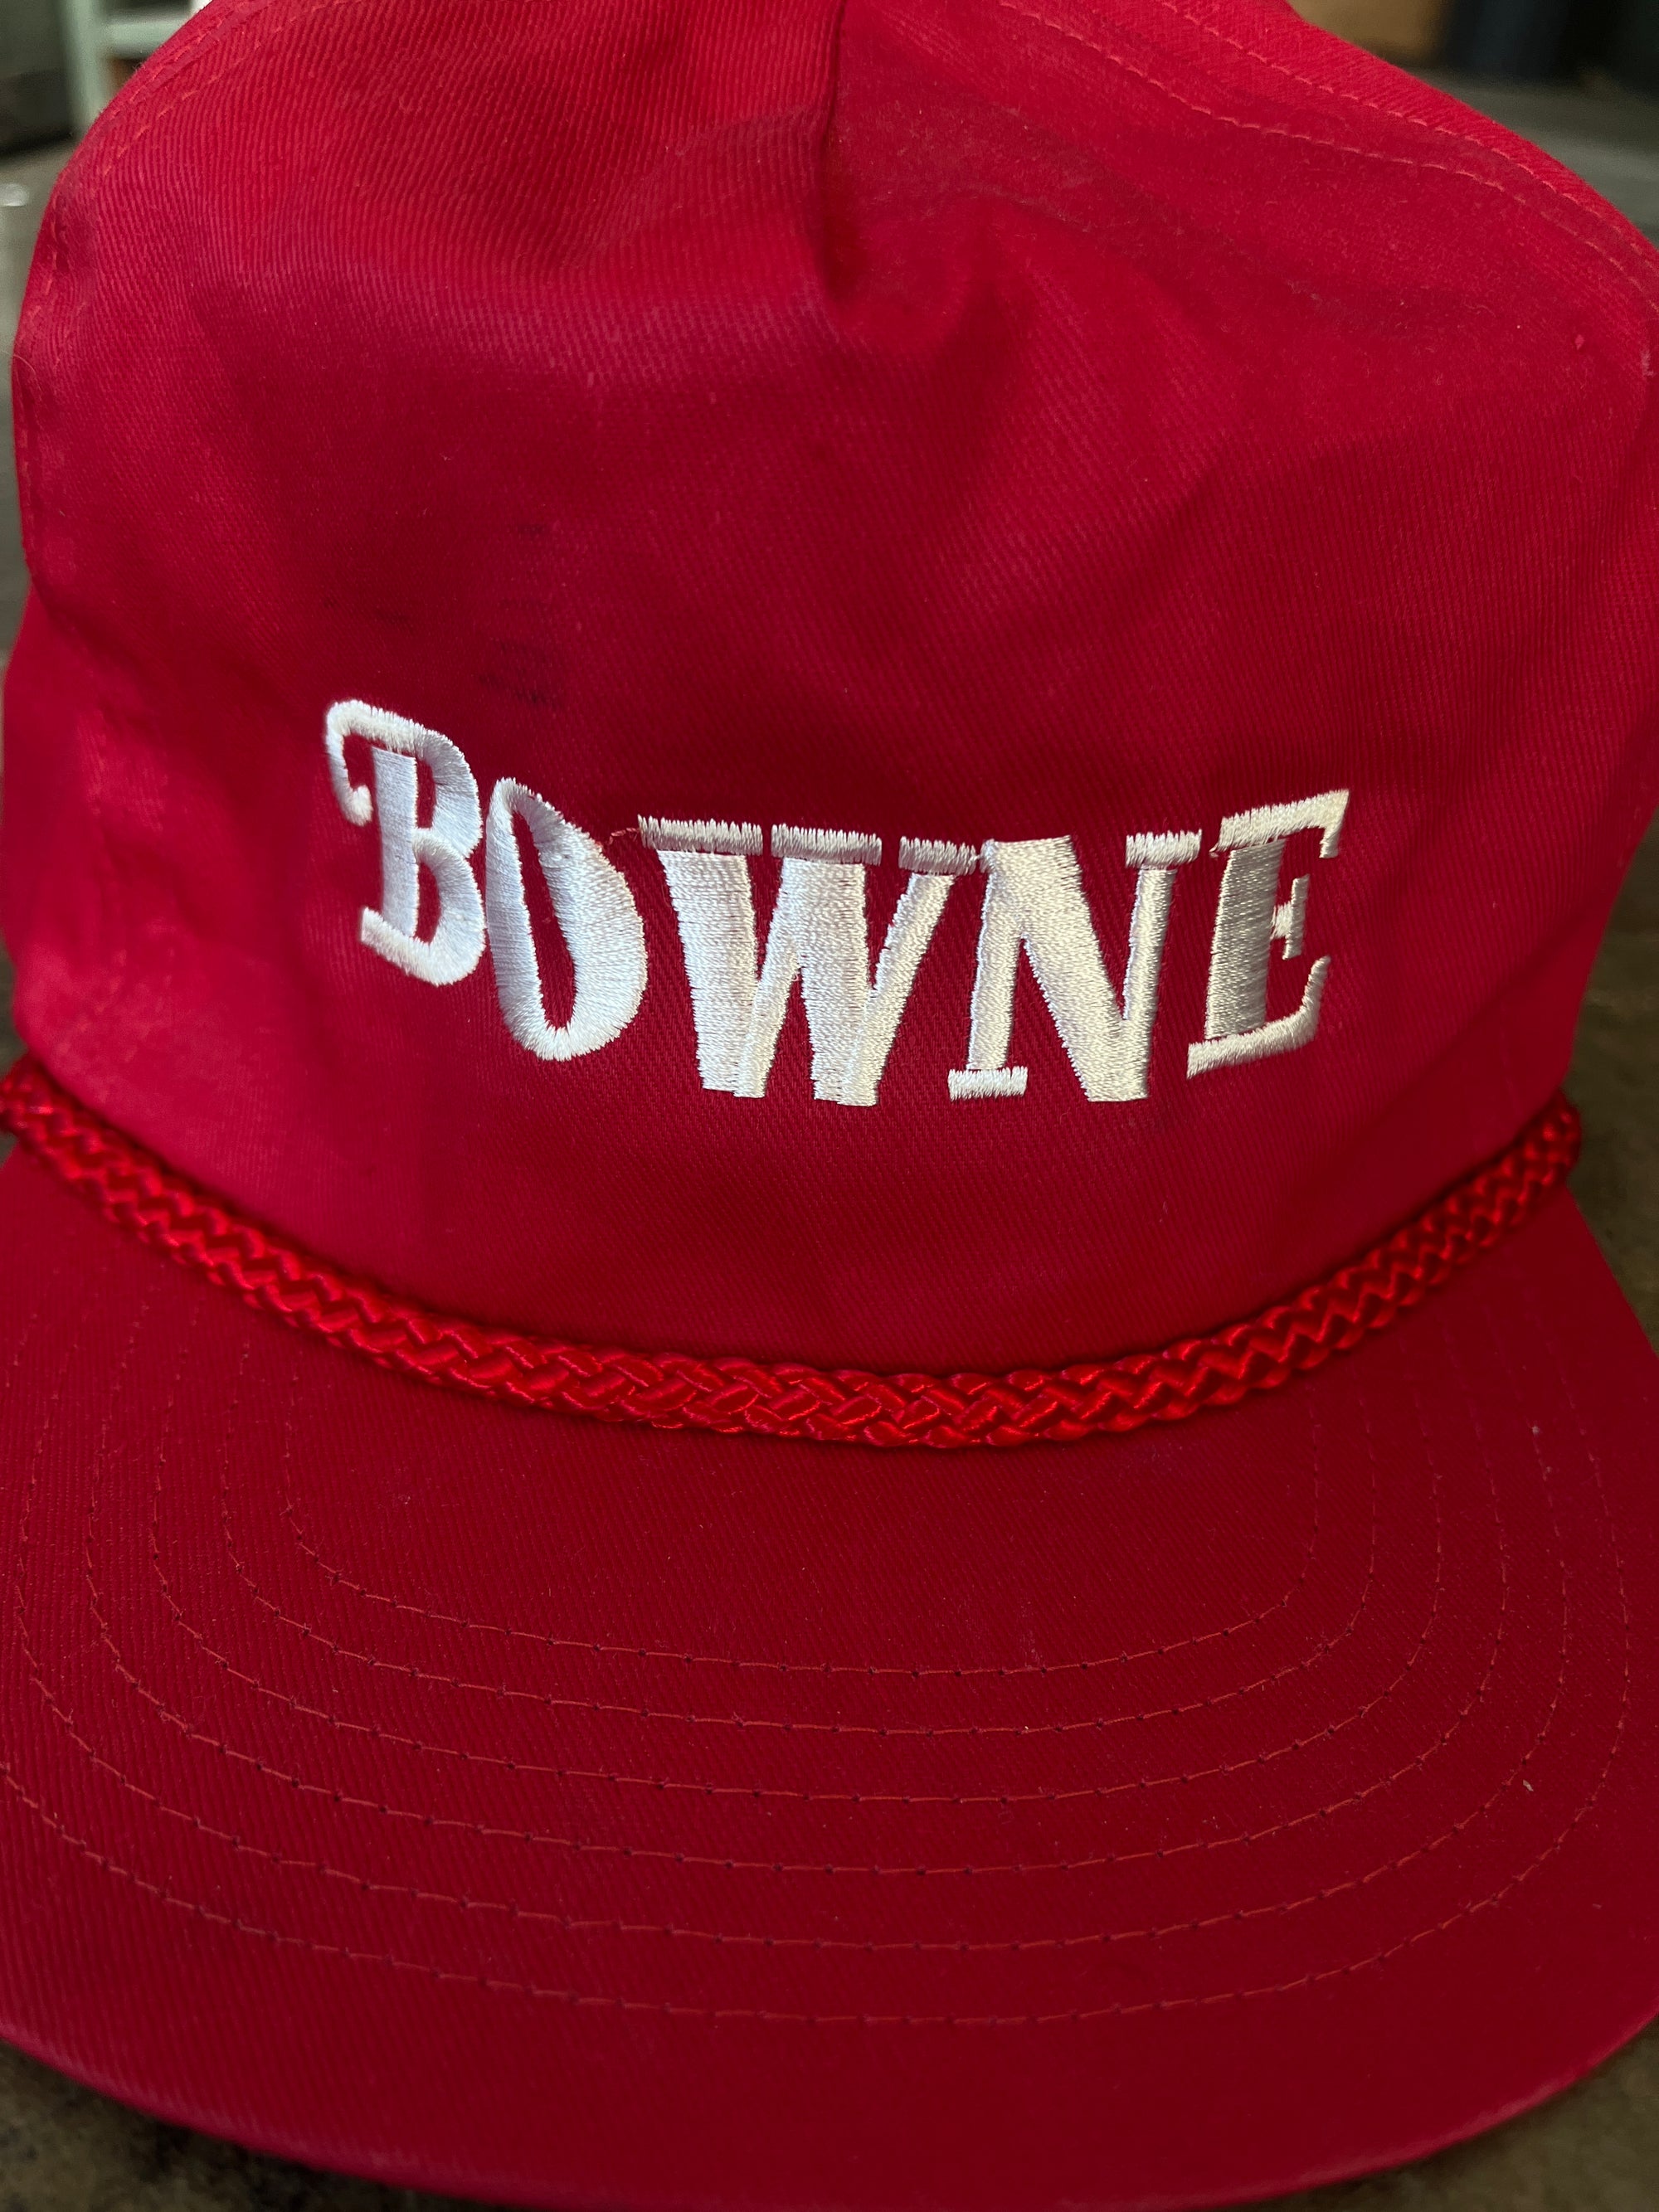 Dark Red Bowne Embroidered Hat